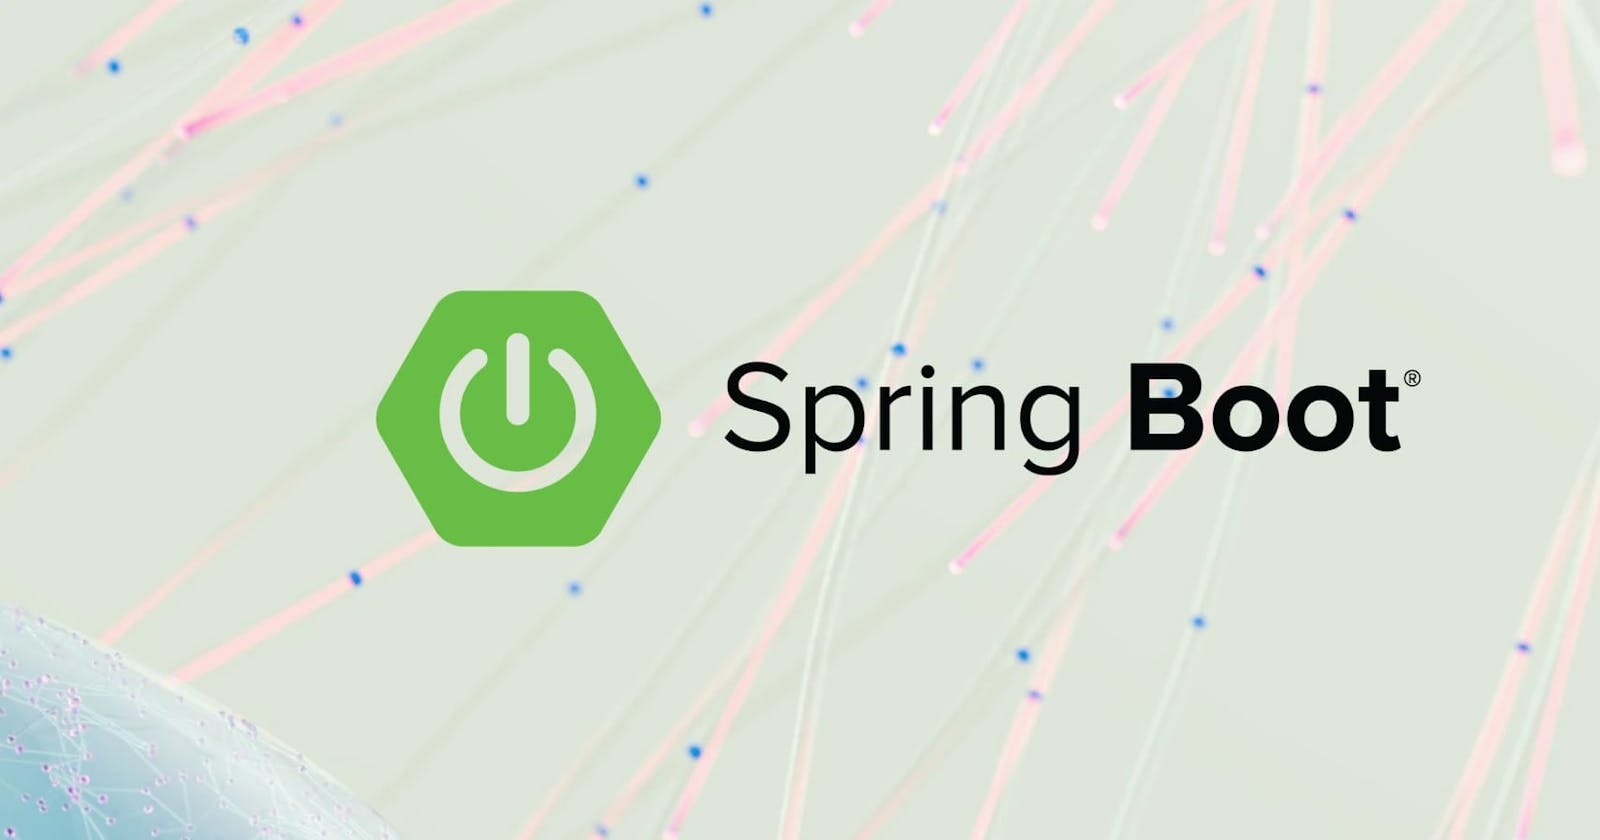 How can you validate input for a Spring Boot web service?